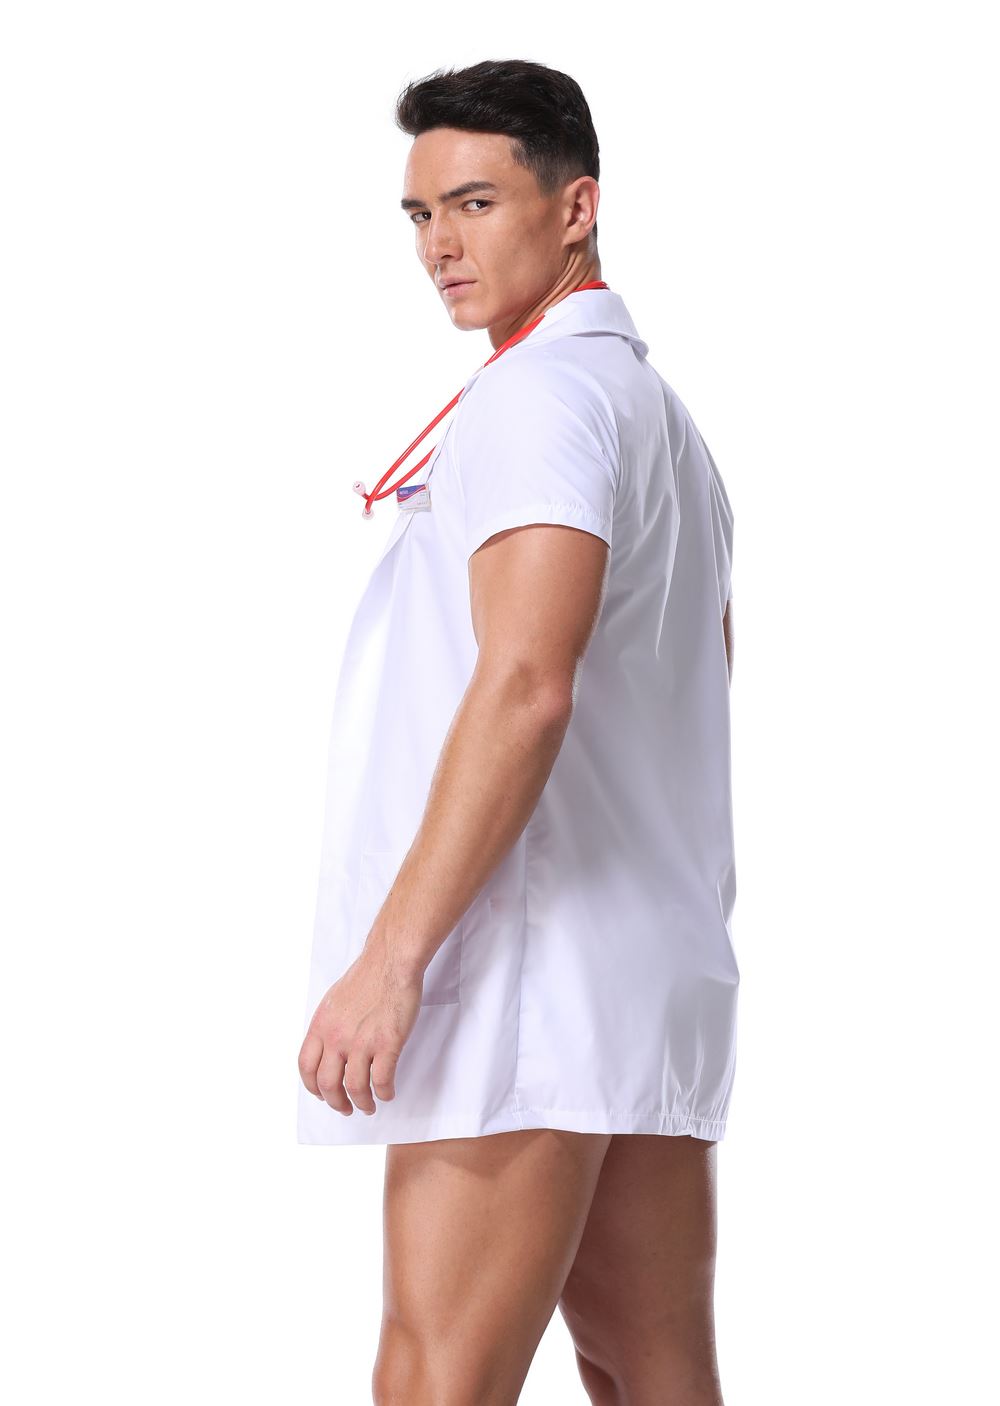 F1902 sexy doctor costume for men